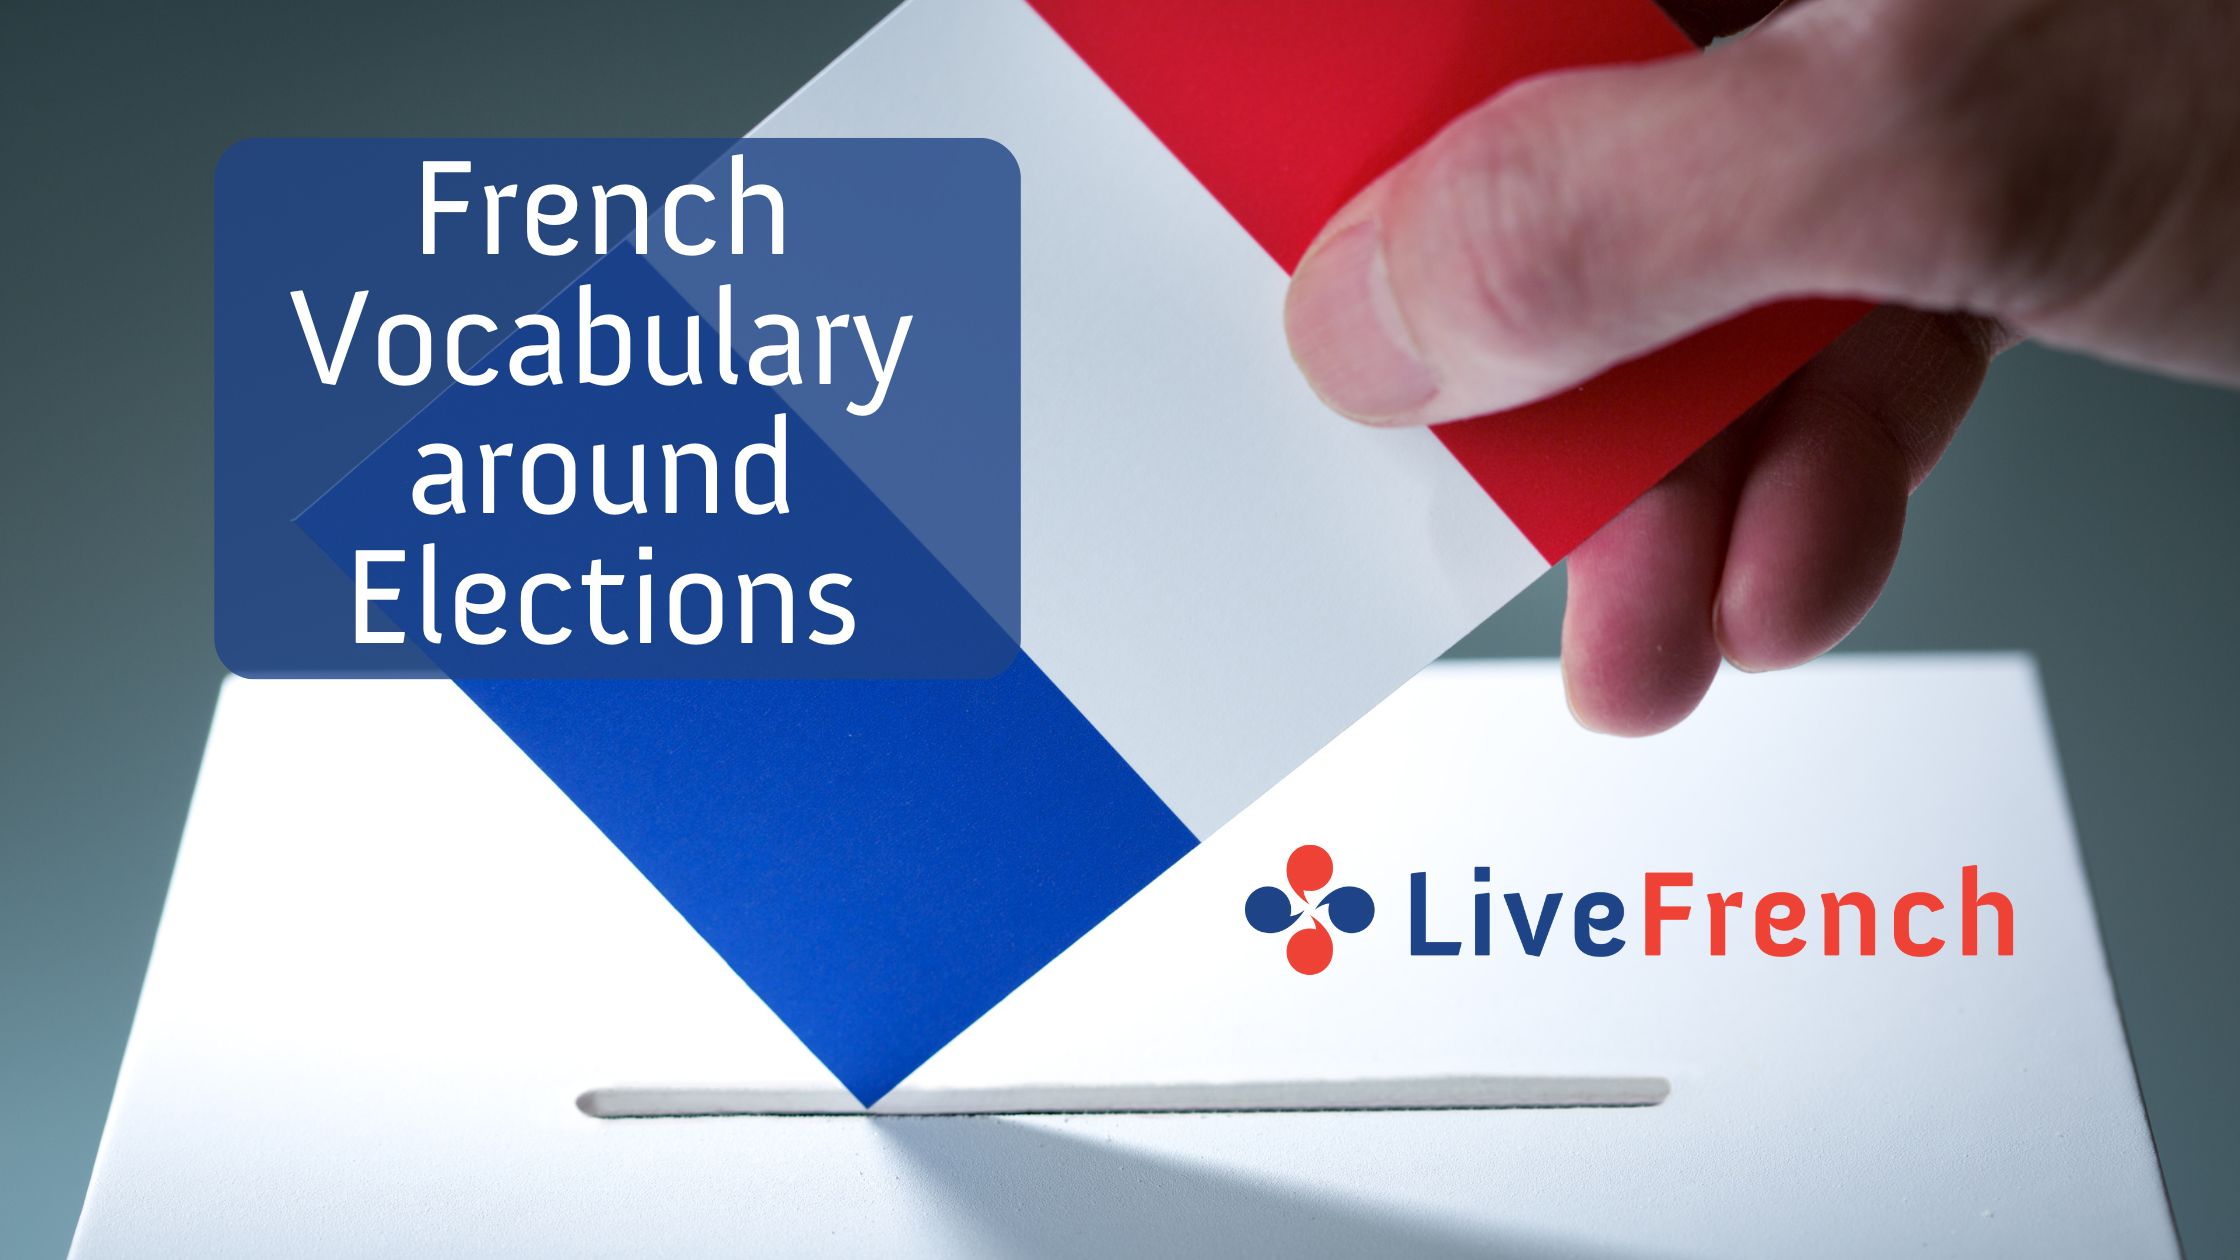 French Vocabulary around Elections